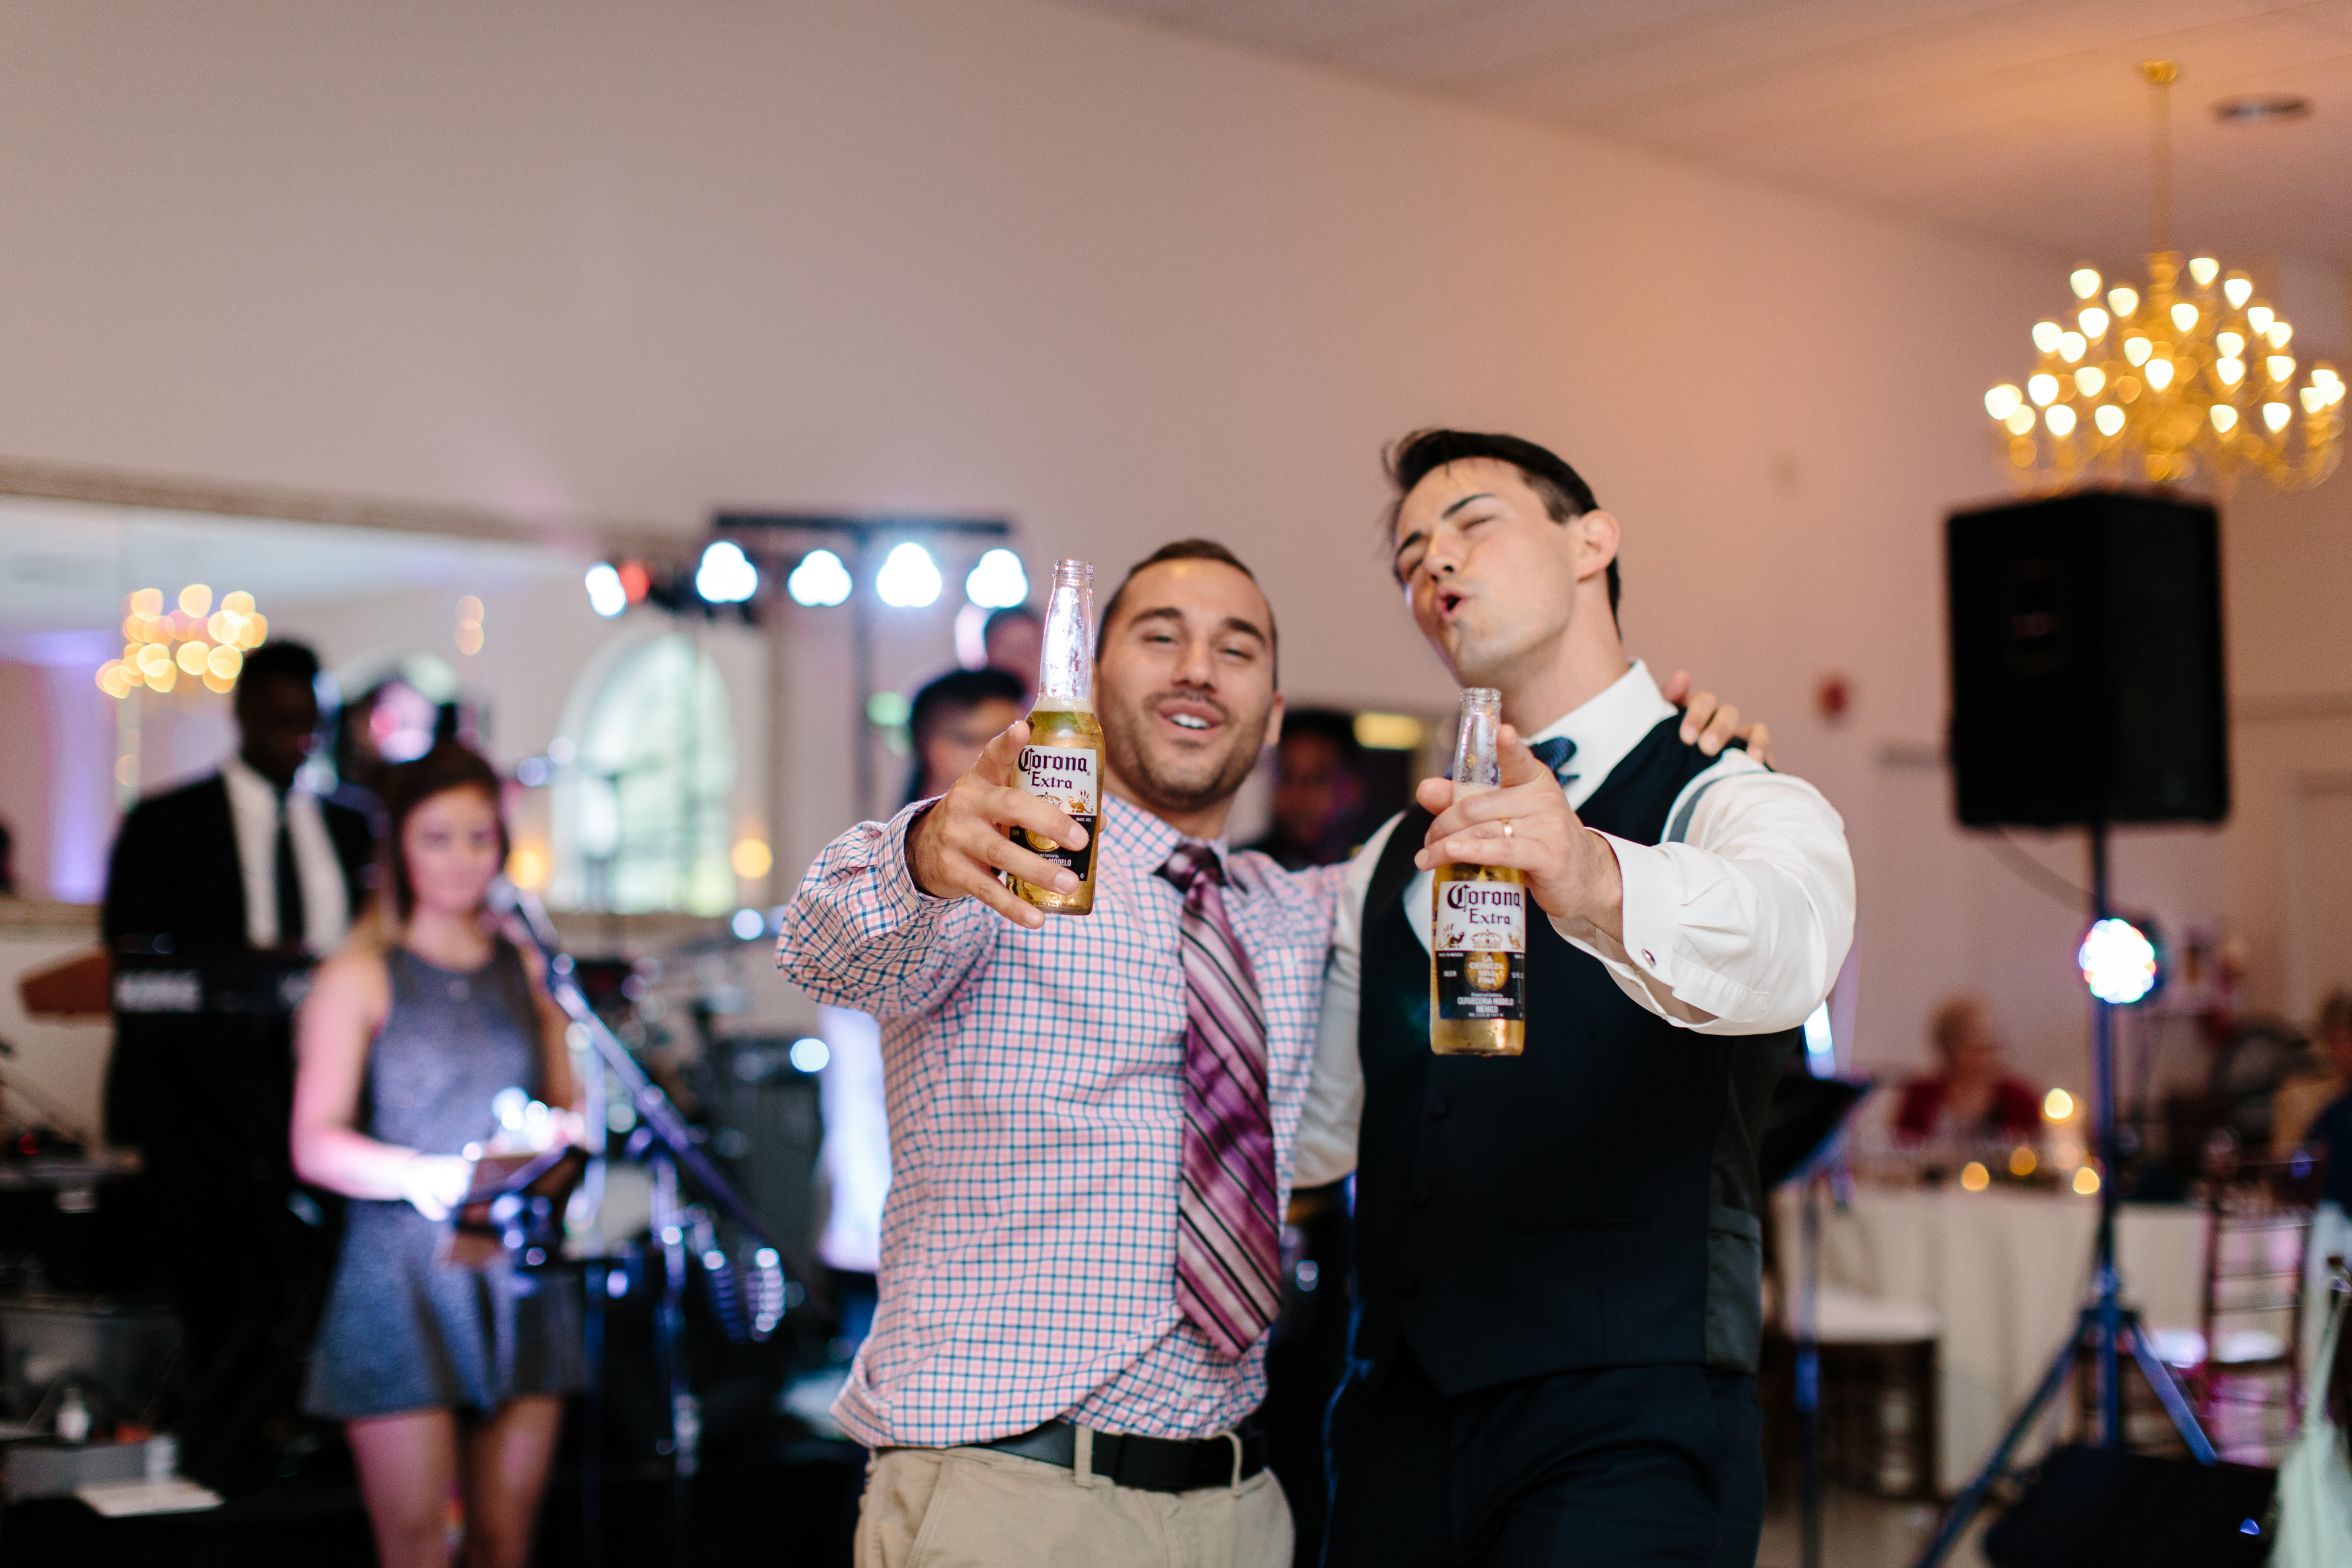 groom and friend singing at wedding reception